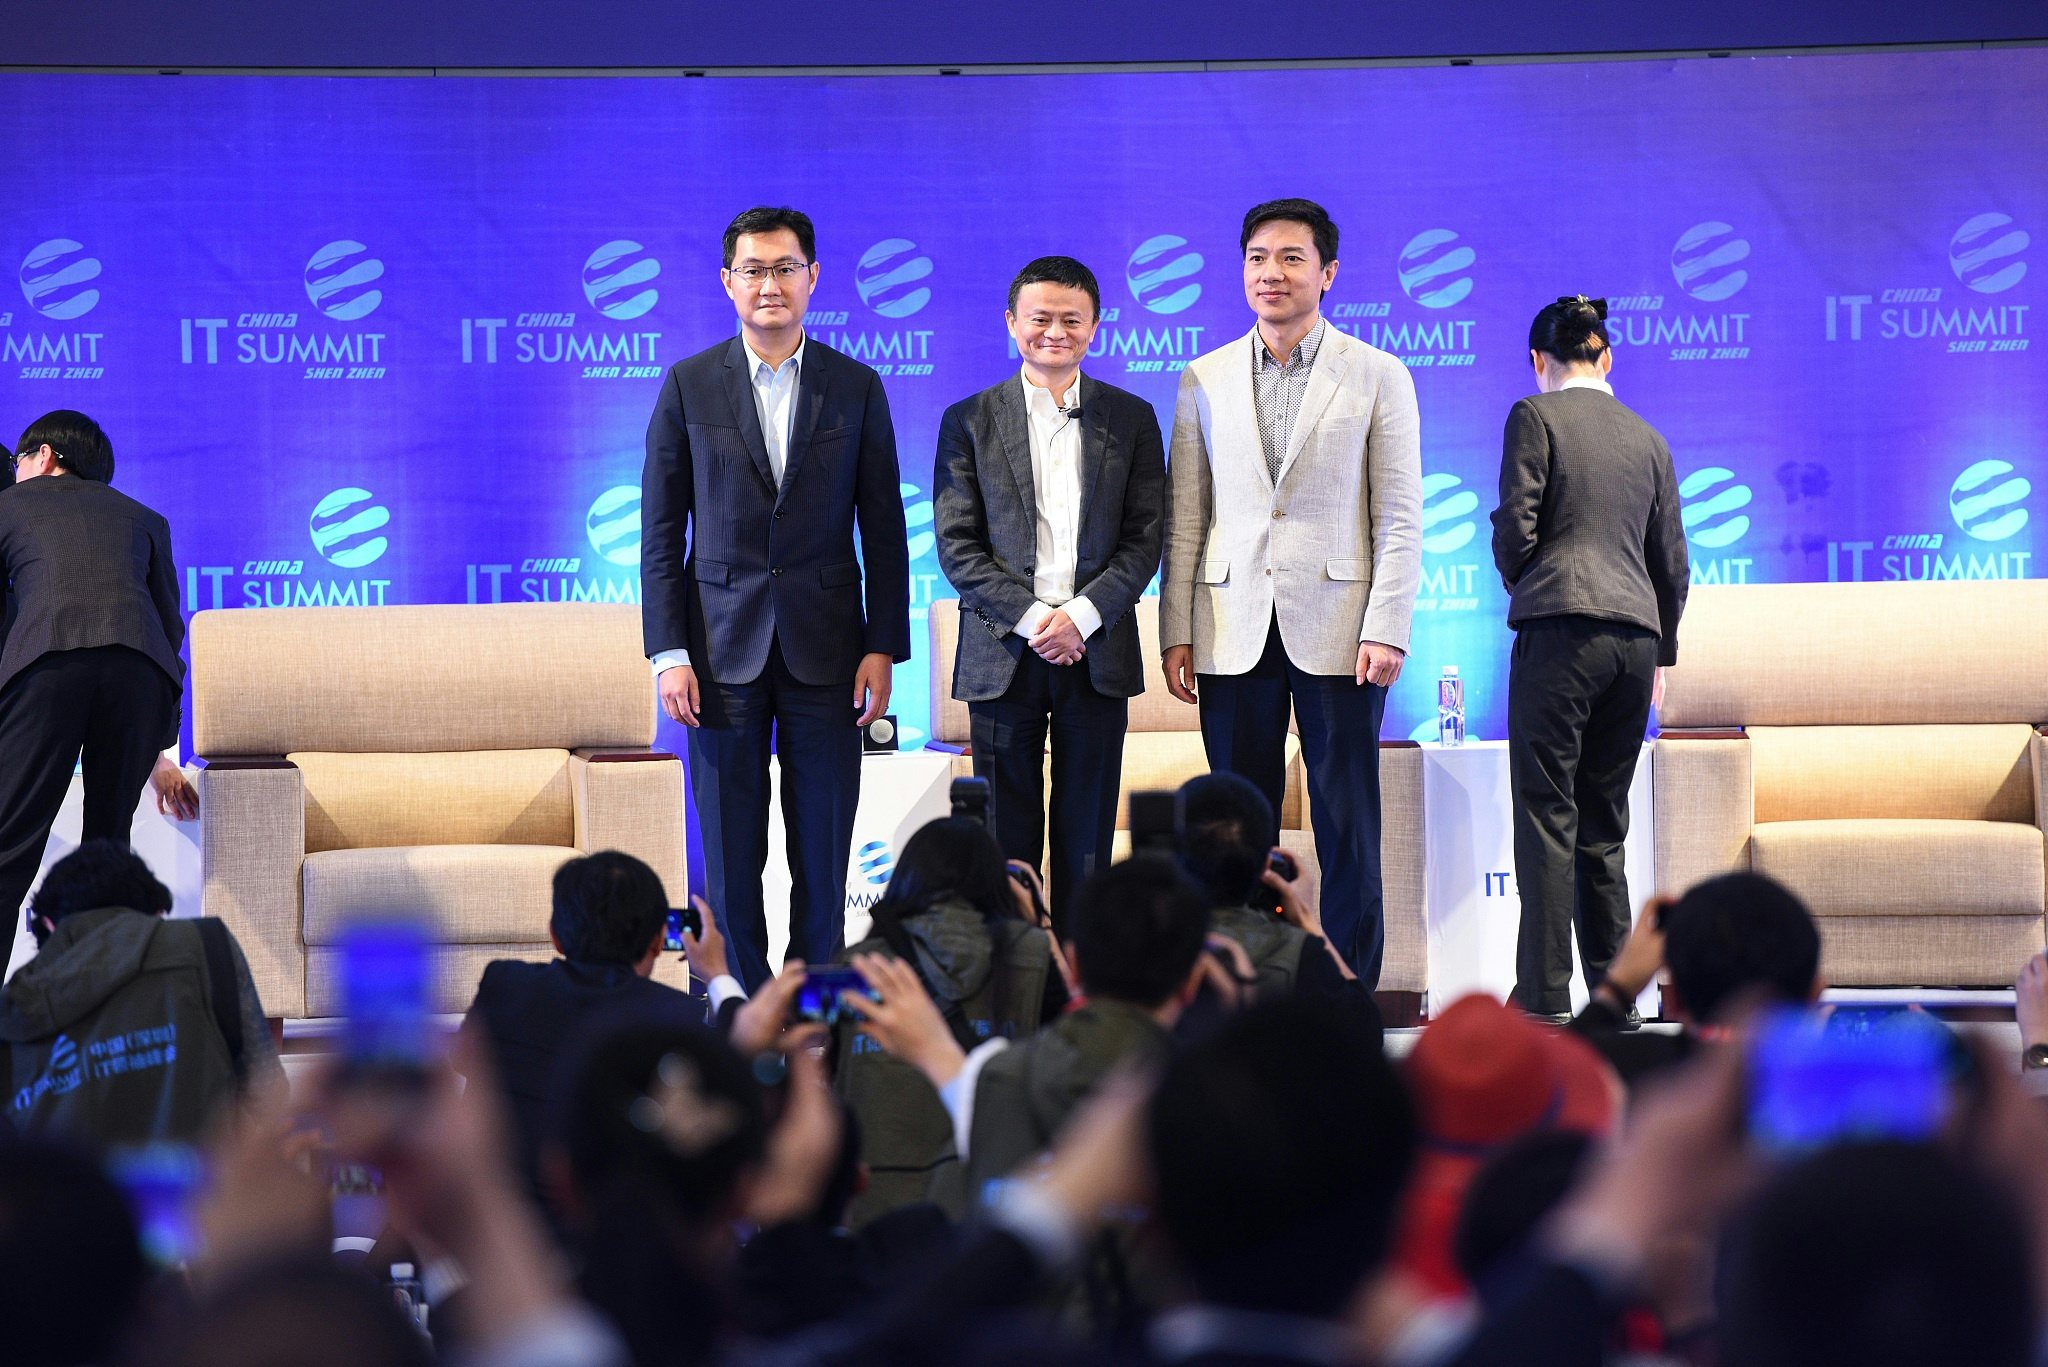 CEOs of Tencent (left), Alibaba (central), and Baidu (right). (Image via VCG) 